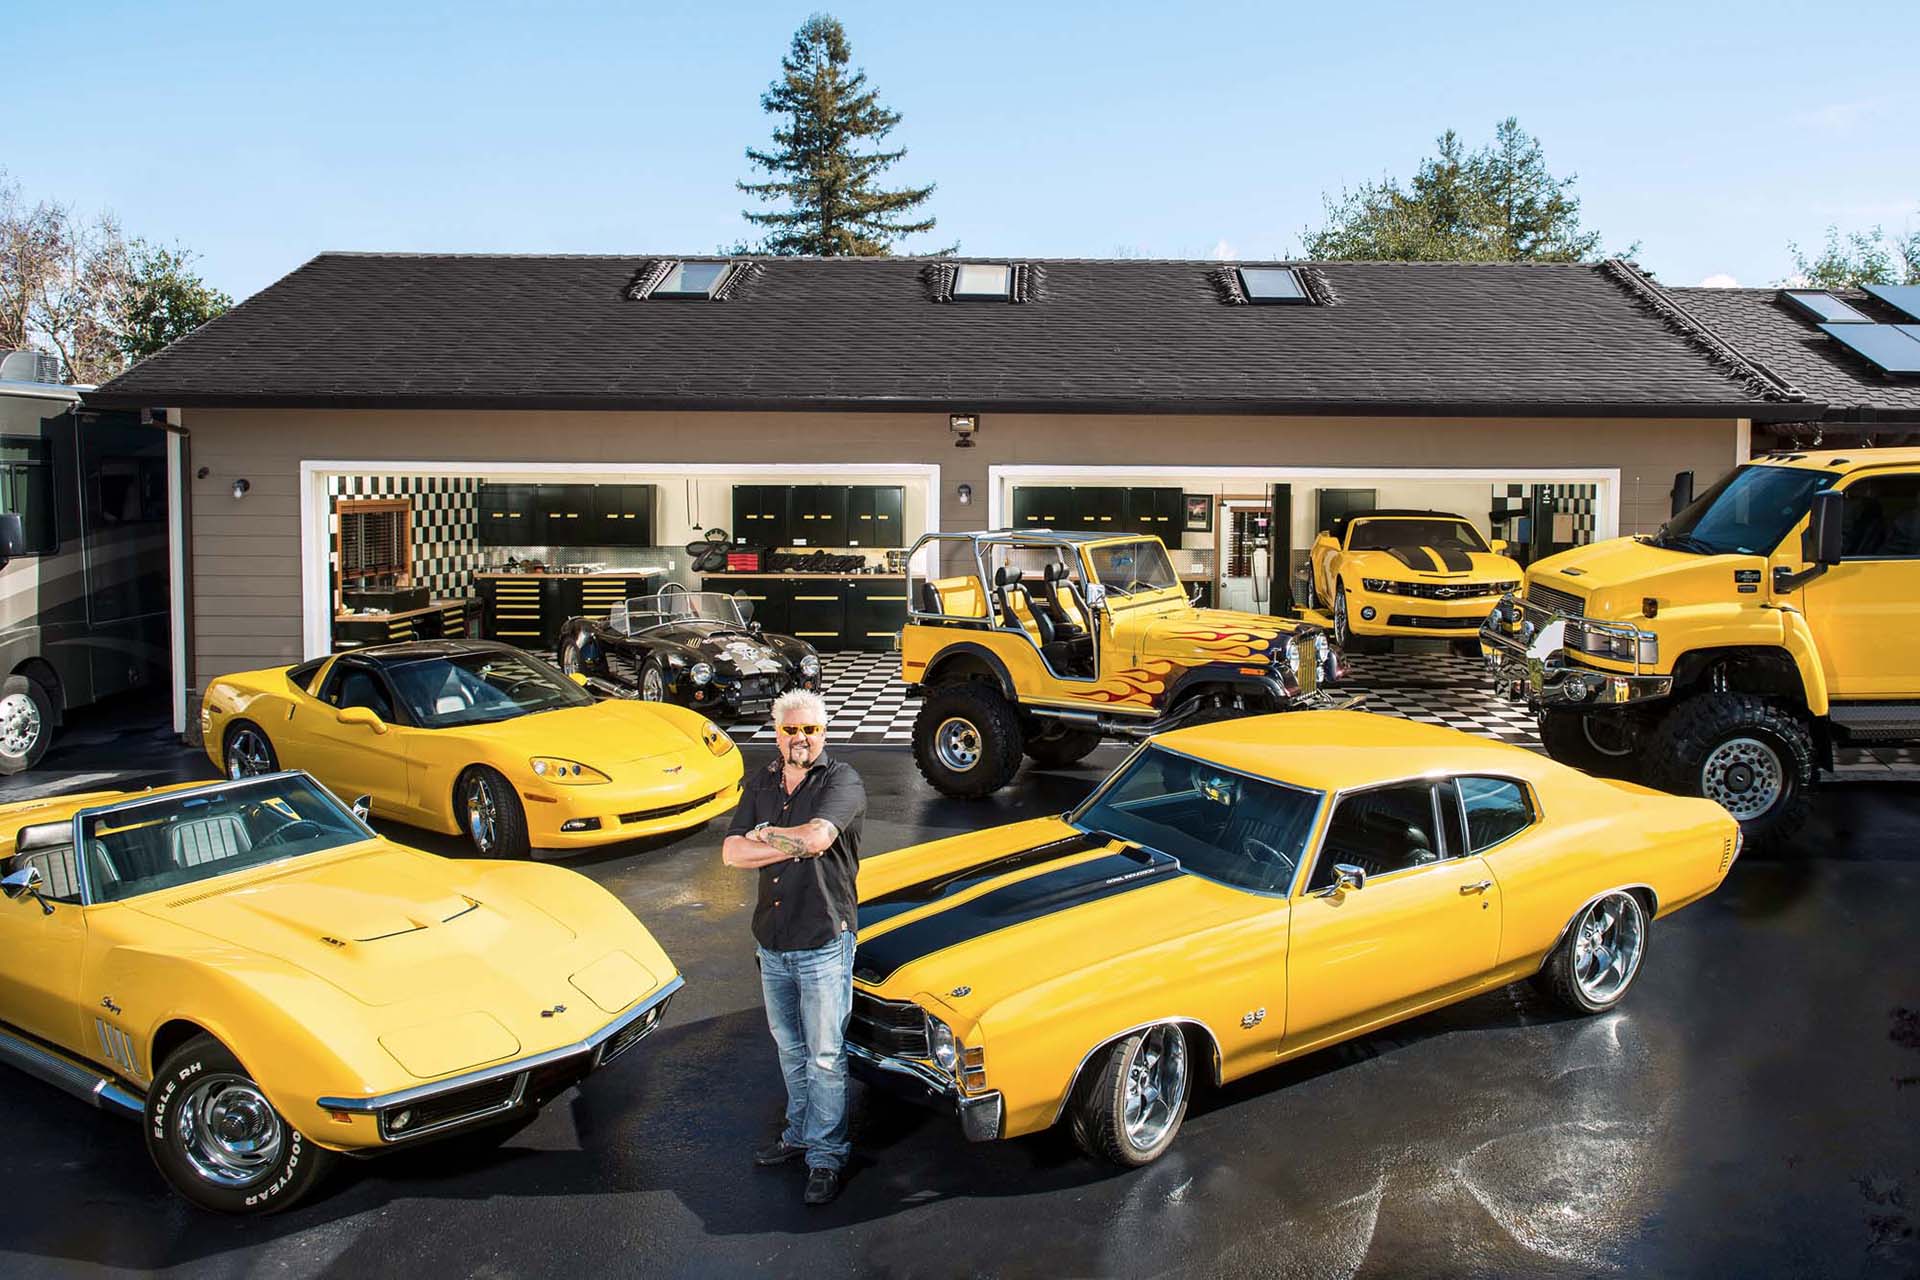 The flamboyant Fieri favours yellow automobiles, including a Camaro, Corvette, and a Lamborghini Gallardo. Incredibly, a few years ago, his Gallardo was stolen from a dealership by a 16-year-old, who was later sentenced to life in jail for other crimes.